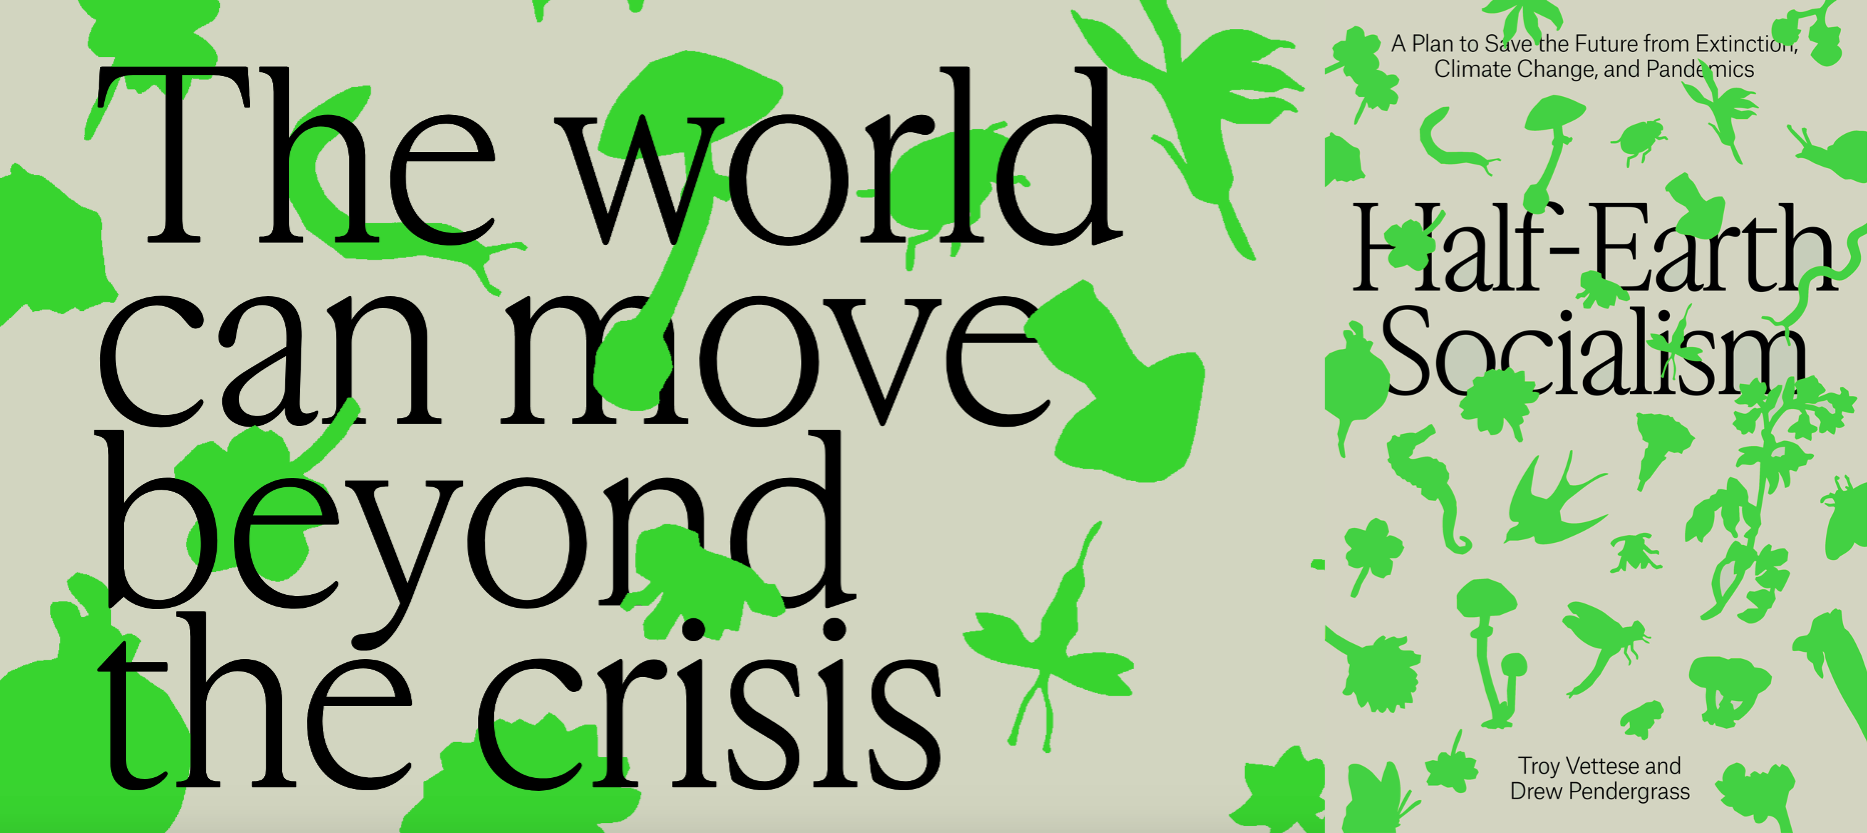 We can move beyond the crisis Half-Earth Socialism book graphic.